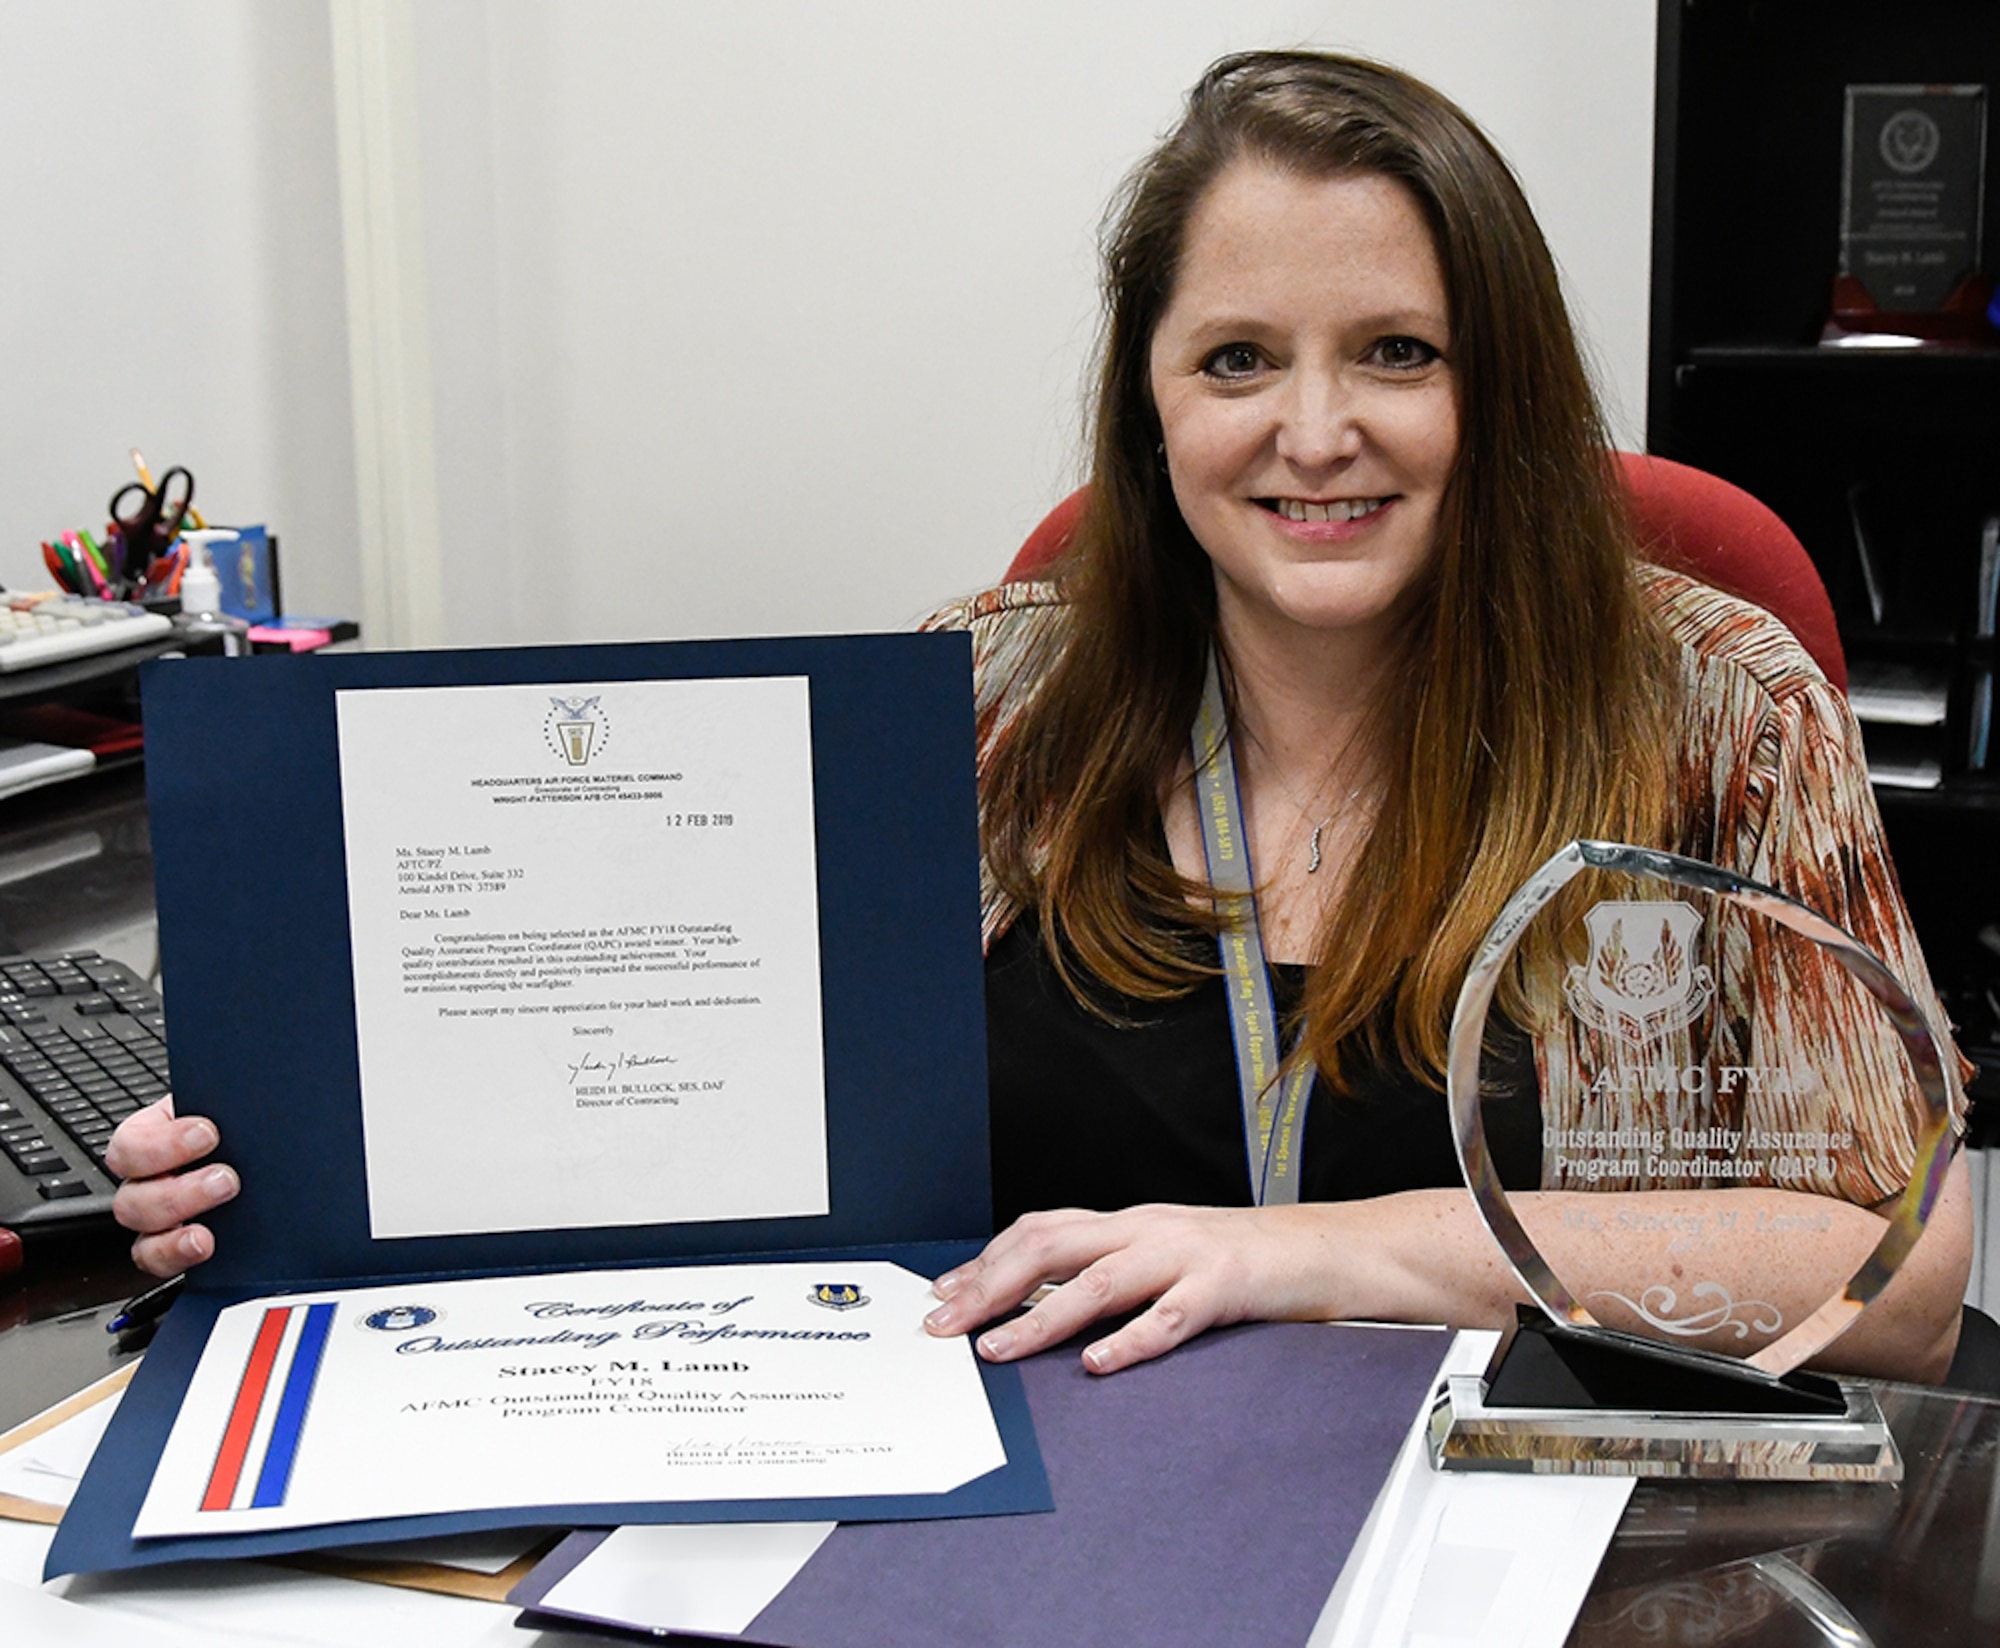 Stacey Lamb, AEDC Quality Assurance Program Coordinator and Small Business Specialist at Arnold Air Force Base, displays the award and certificate she received for being named the Air Force Materiel Command Outstanding Quality Assurance Program Coordinator for fiscal year 2018. (U.S. Air Force photo by Jill Pickett) (This image was altered by obscuring items for security purposes.)